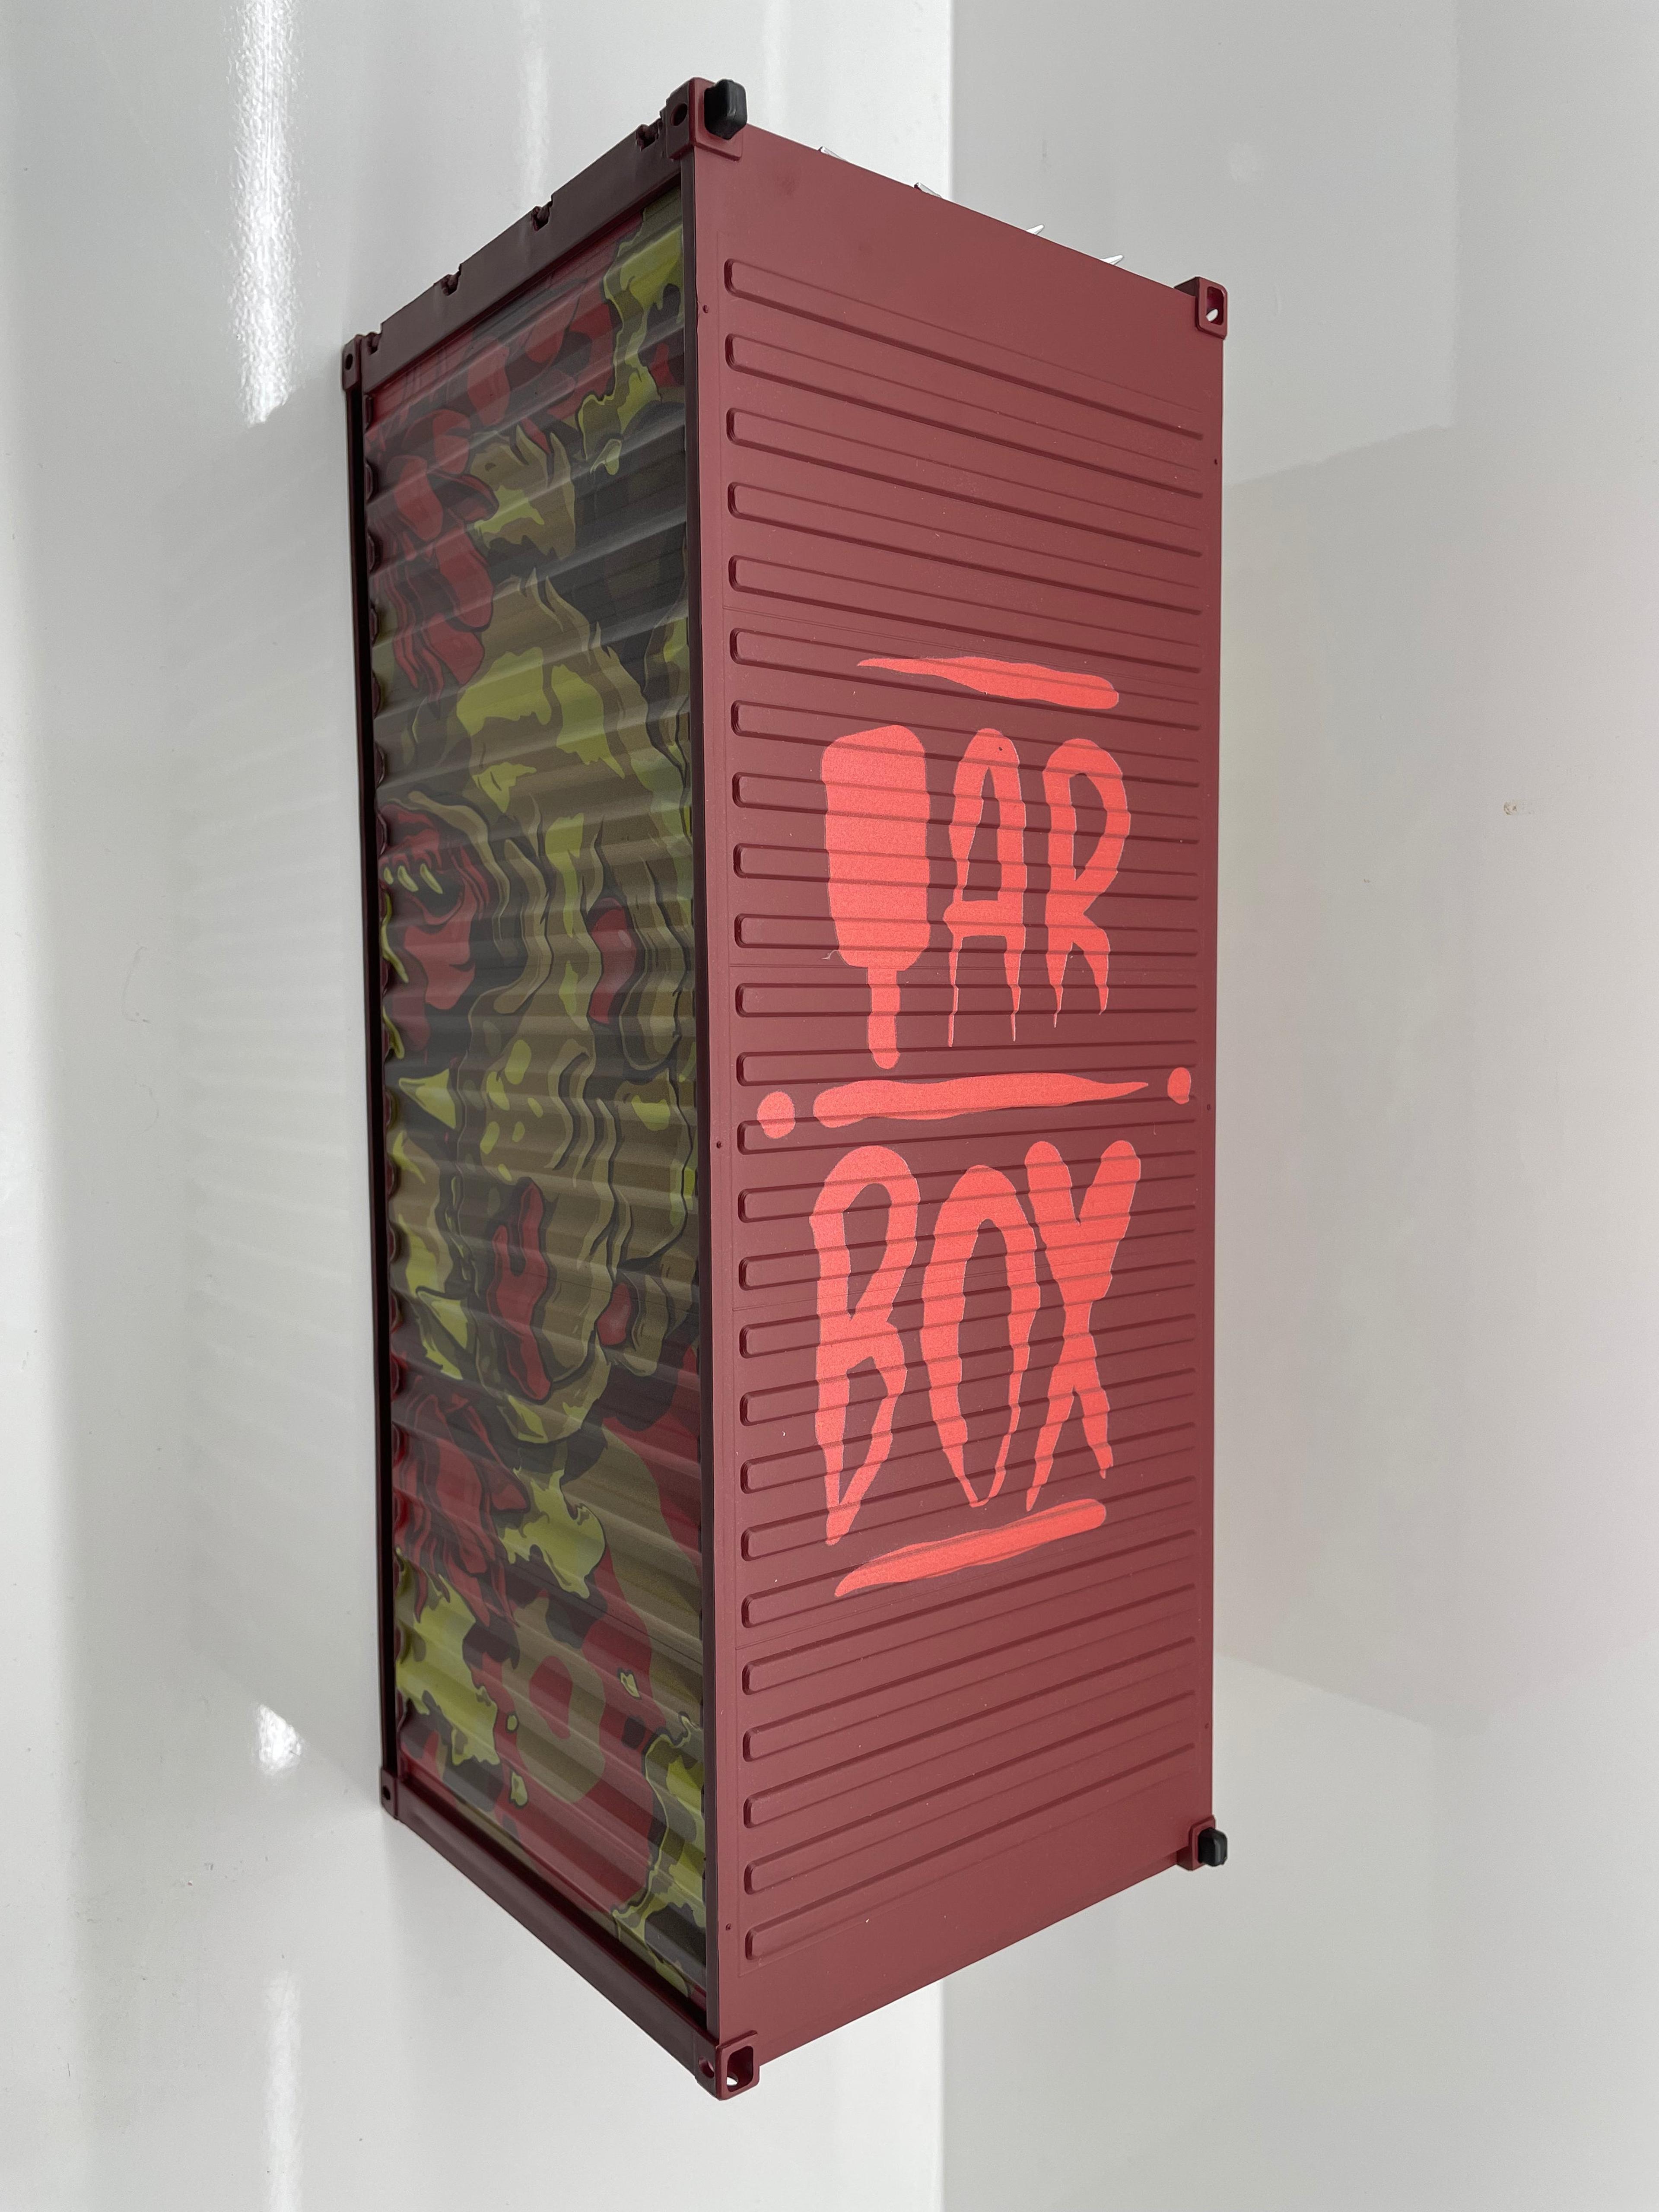 Alternate View 5 of Tarbox Shipping Container Model